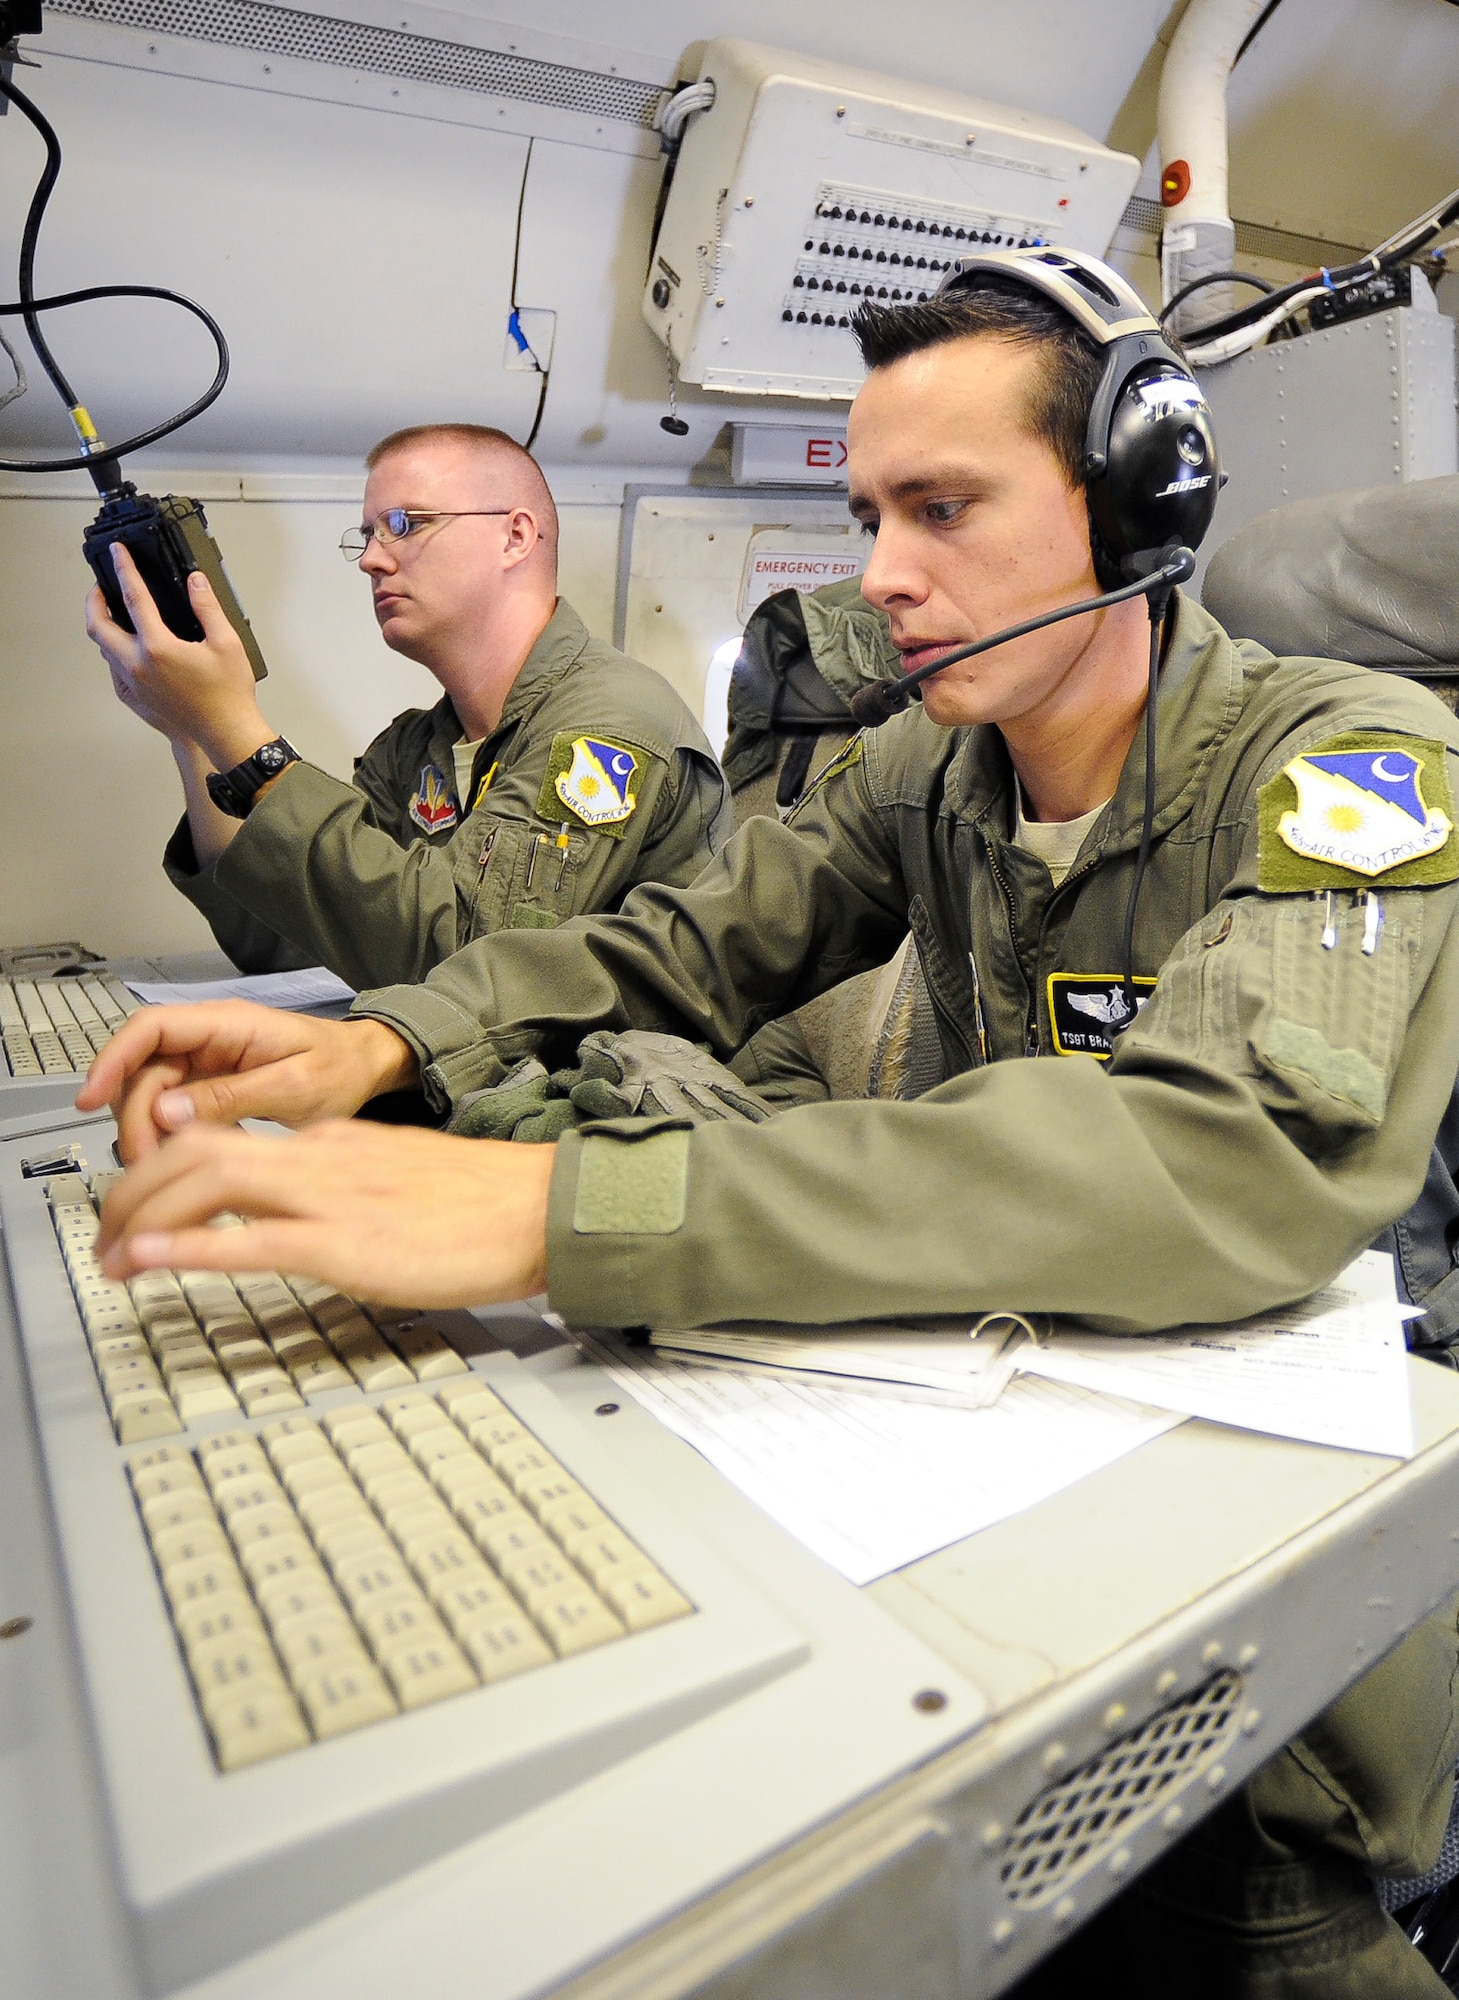 Aircrew members from the 461st Air Control Wing work at an operator work station during a mission aboard the E-8 Joint STARS, Robins Air Force Base, Ga., June 12, 2012.  The  mission was a part of the week long Iron Dagger 2012 exercise hosted by Team Joint STARS.
(National Guard photo by Master Sgt. Roger Parsons/Released)
